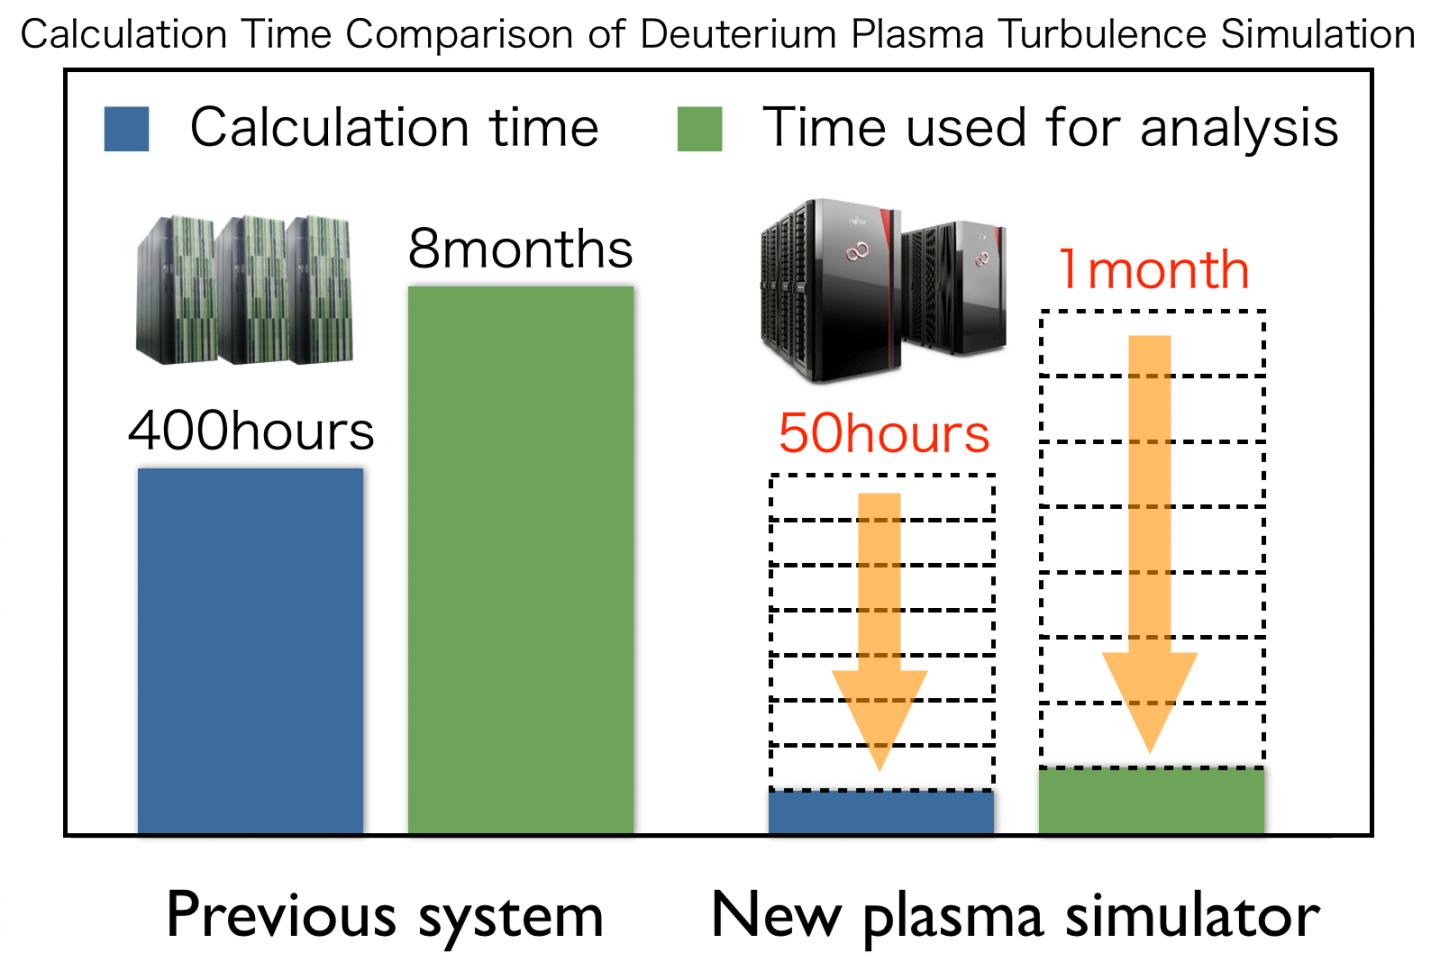 Figure 1: Comparison of Calculation Performance in the Previous System and in the New Plasma Simulator